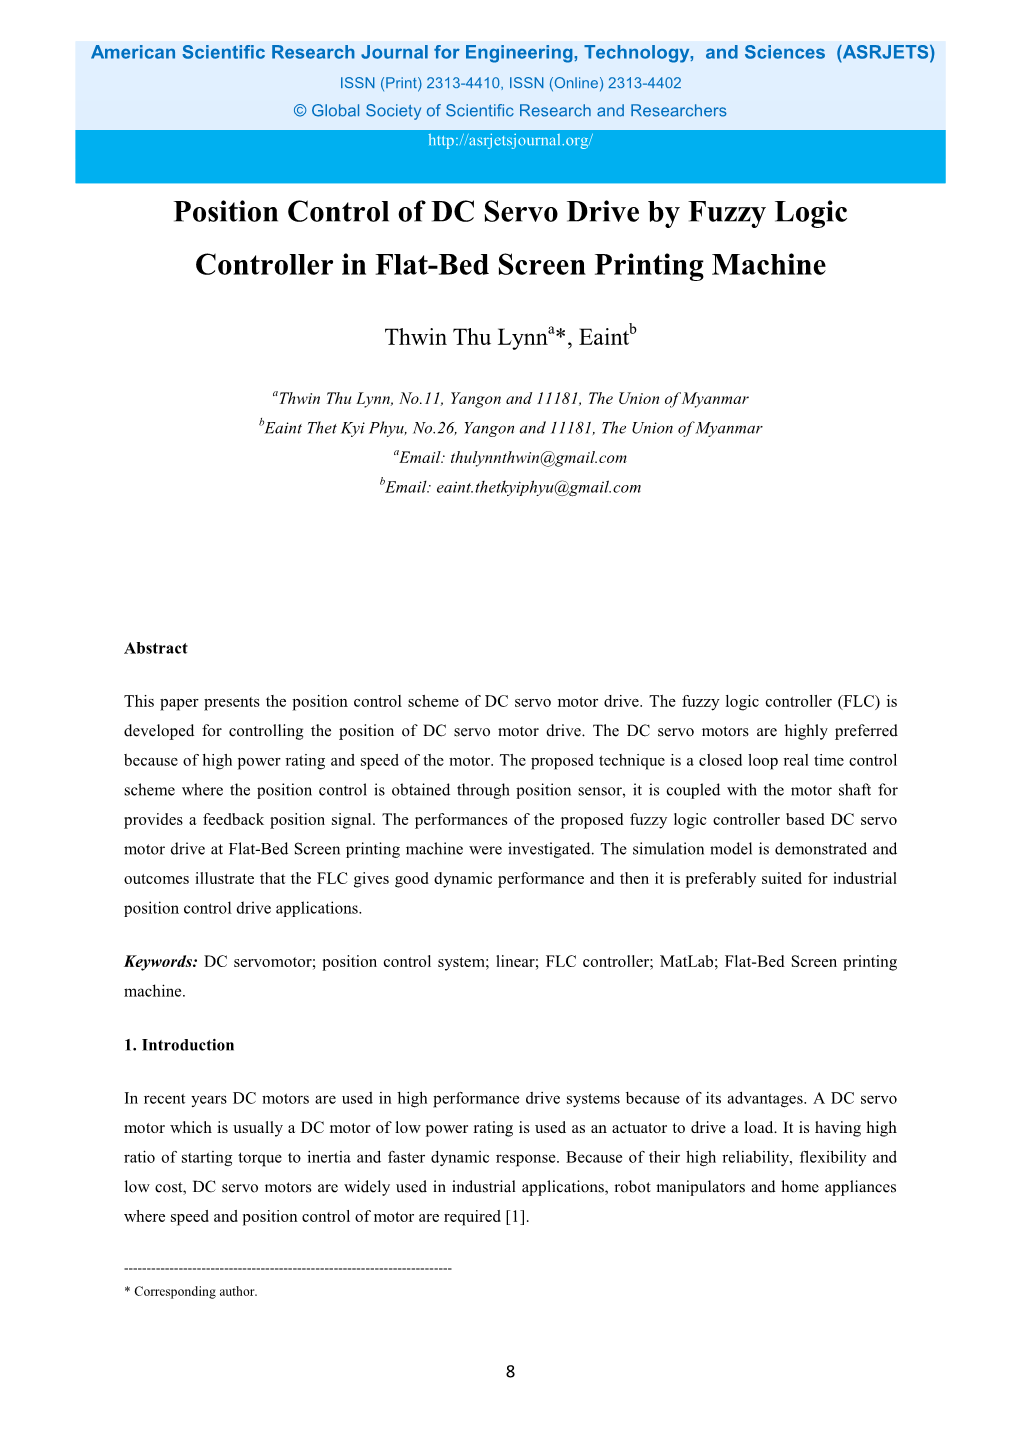 Position Control of DC Servo Drive by Fuzzy Logic Controller in Flat-Bed Screen Printing Machine